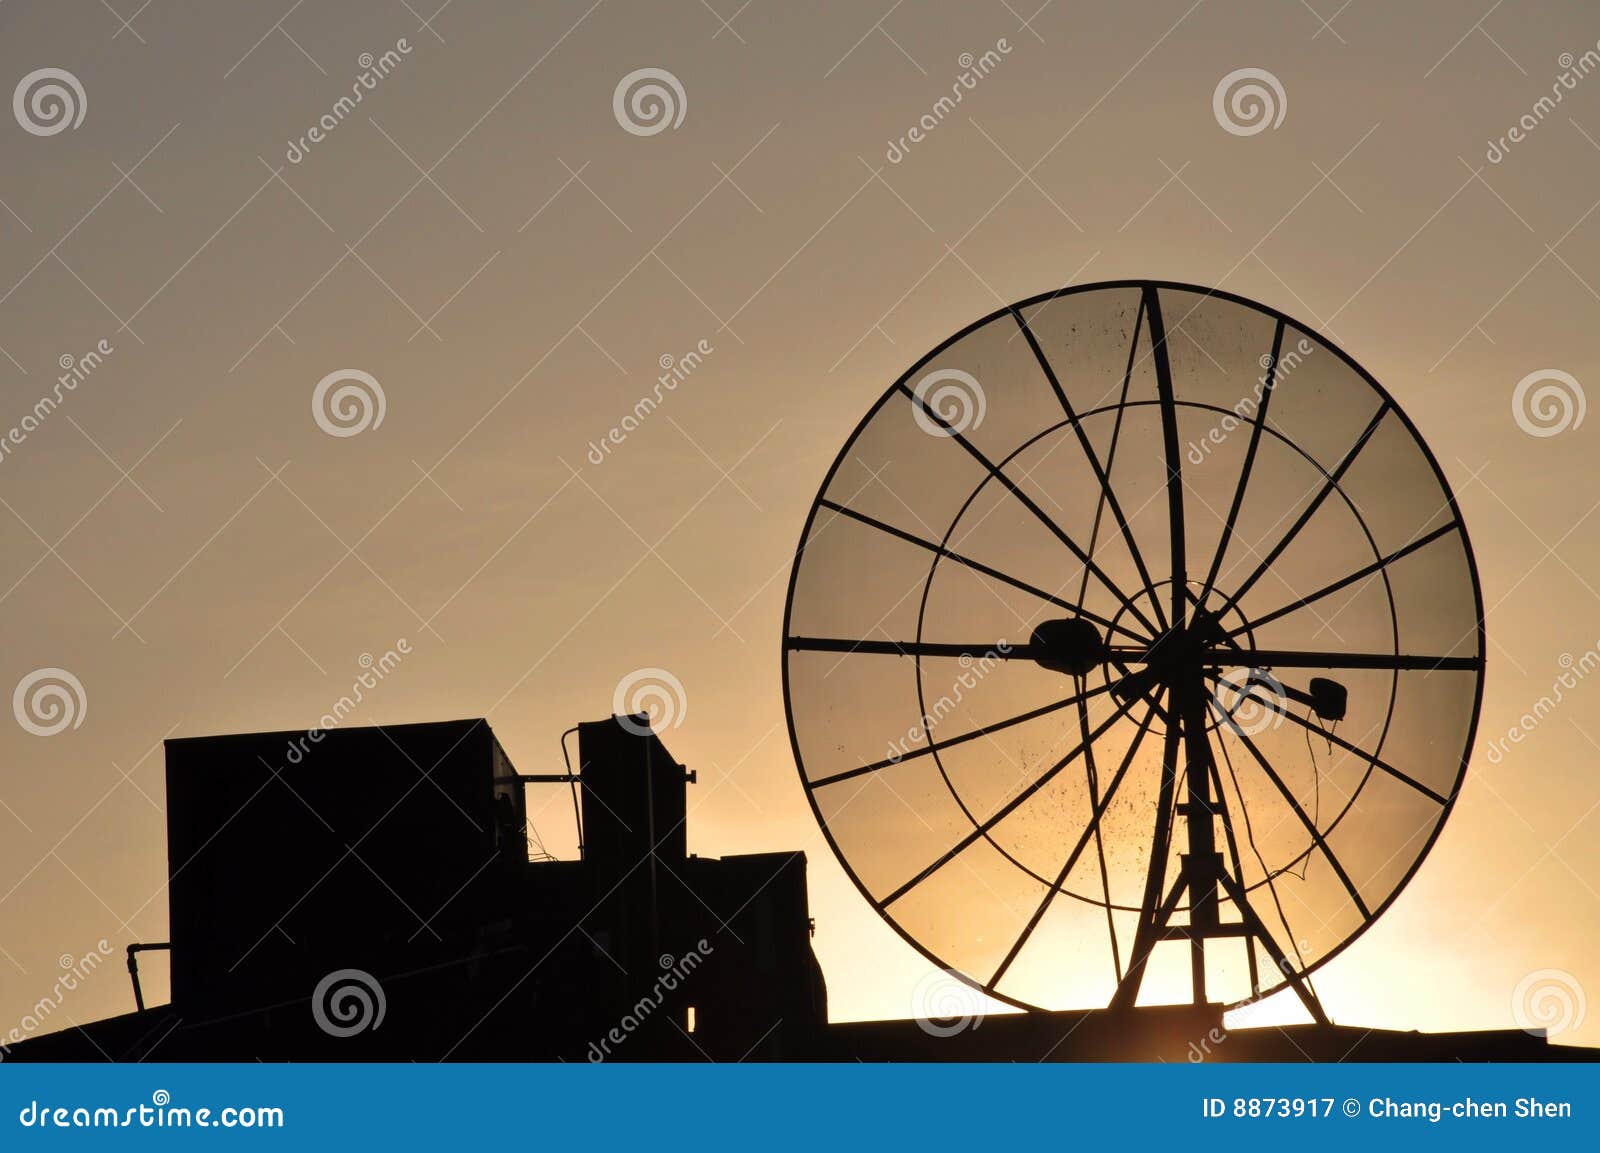 satellite dish on a roof